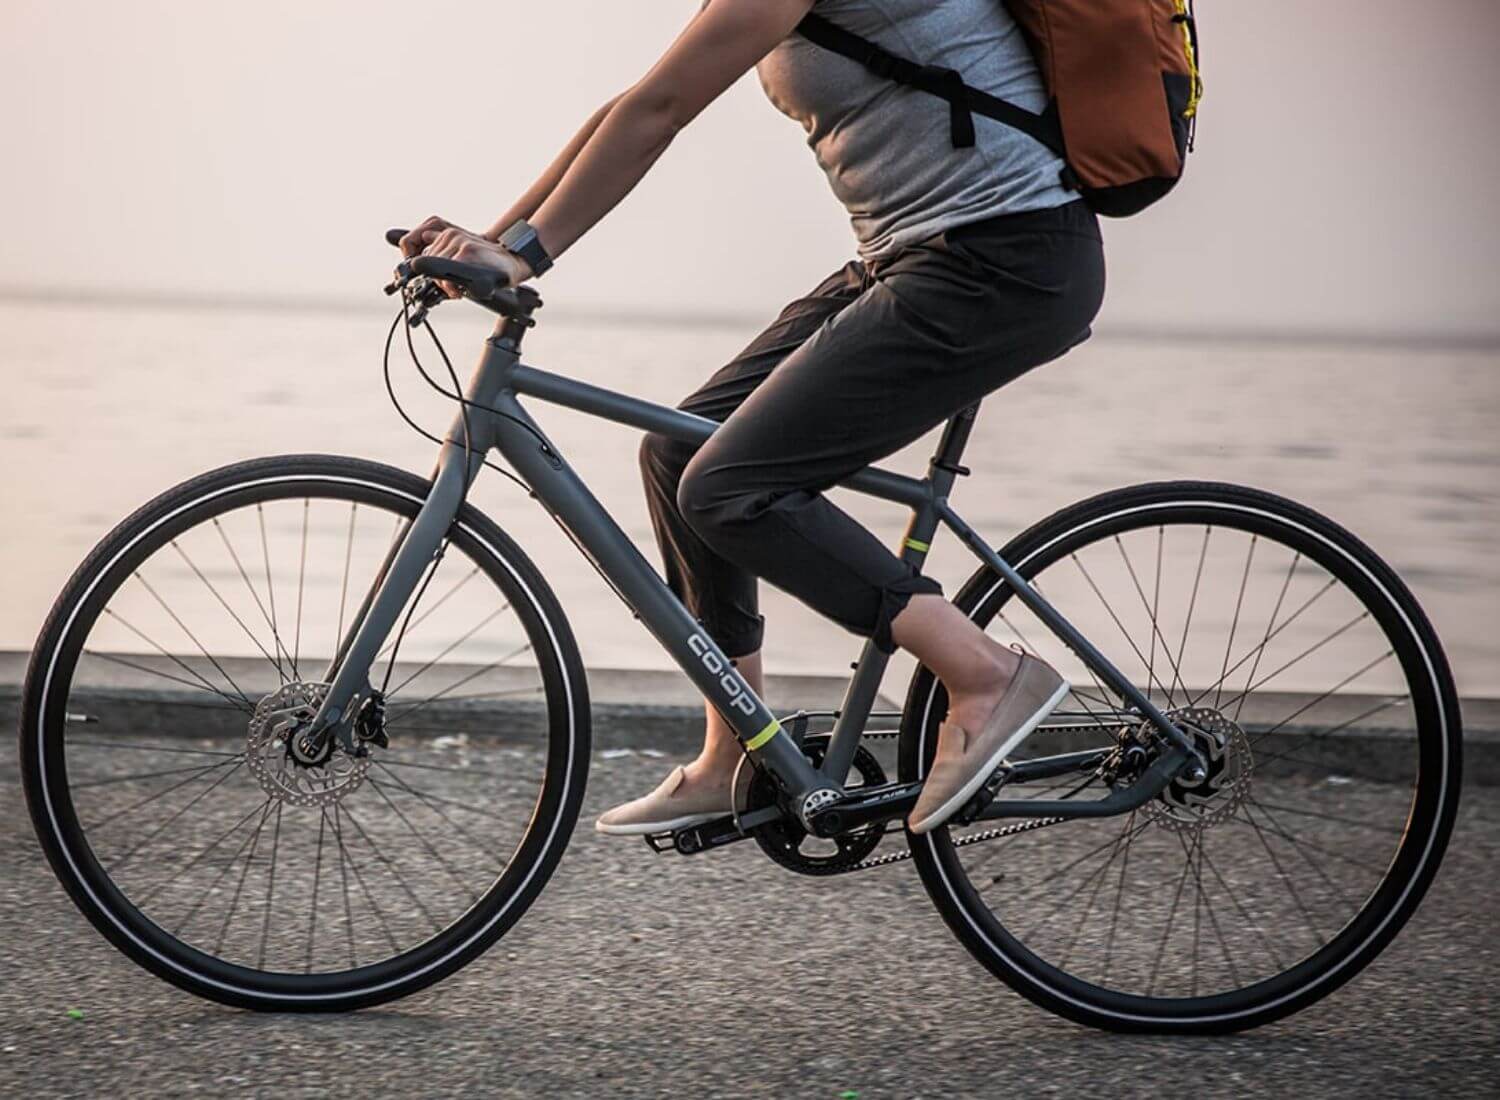 Why Hybrid Bikes Are Great For Beginner Riders?